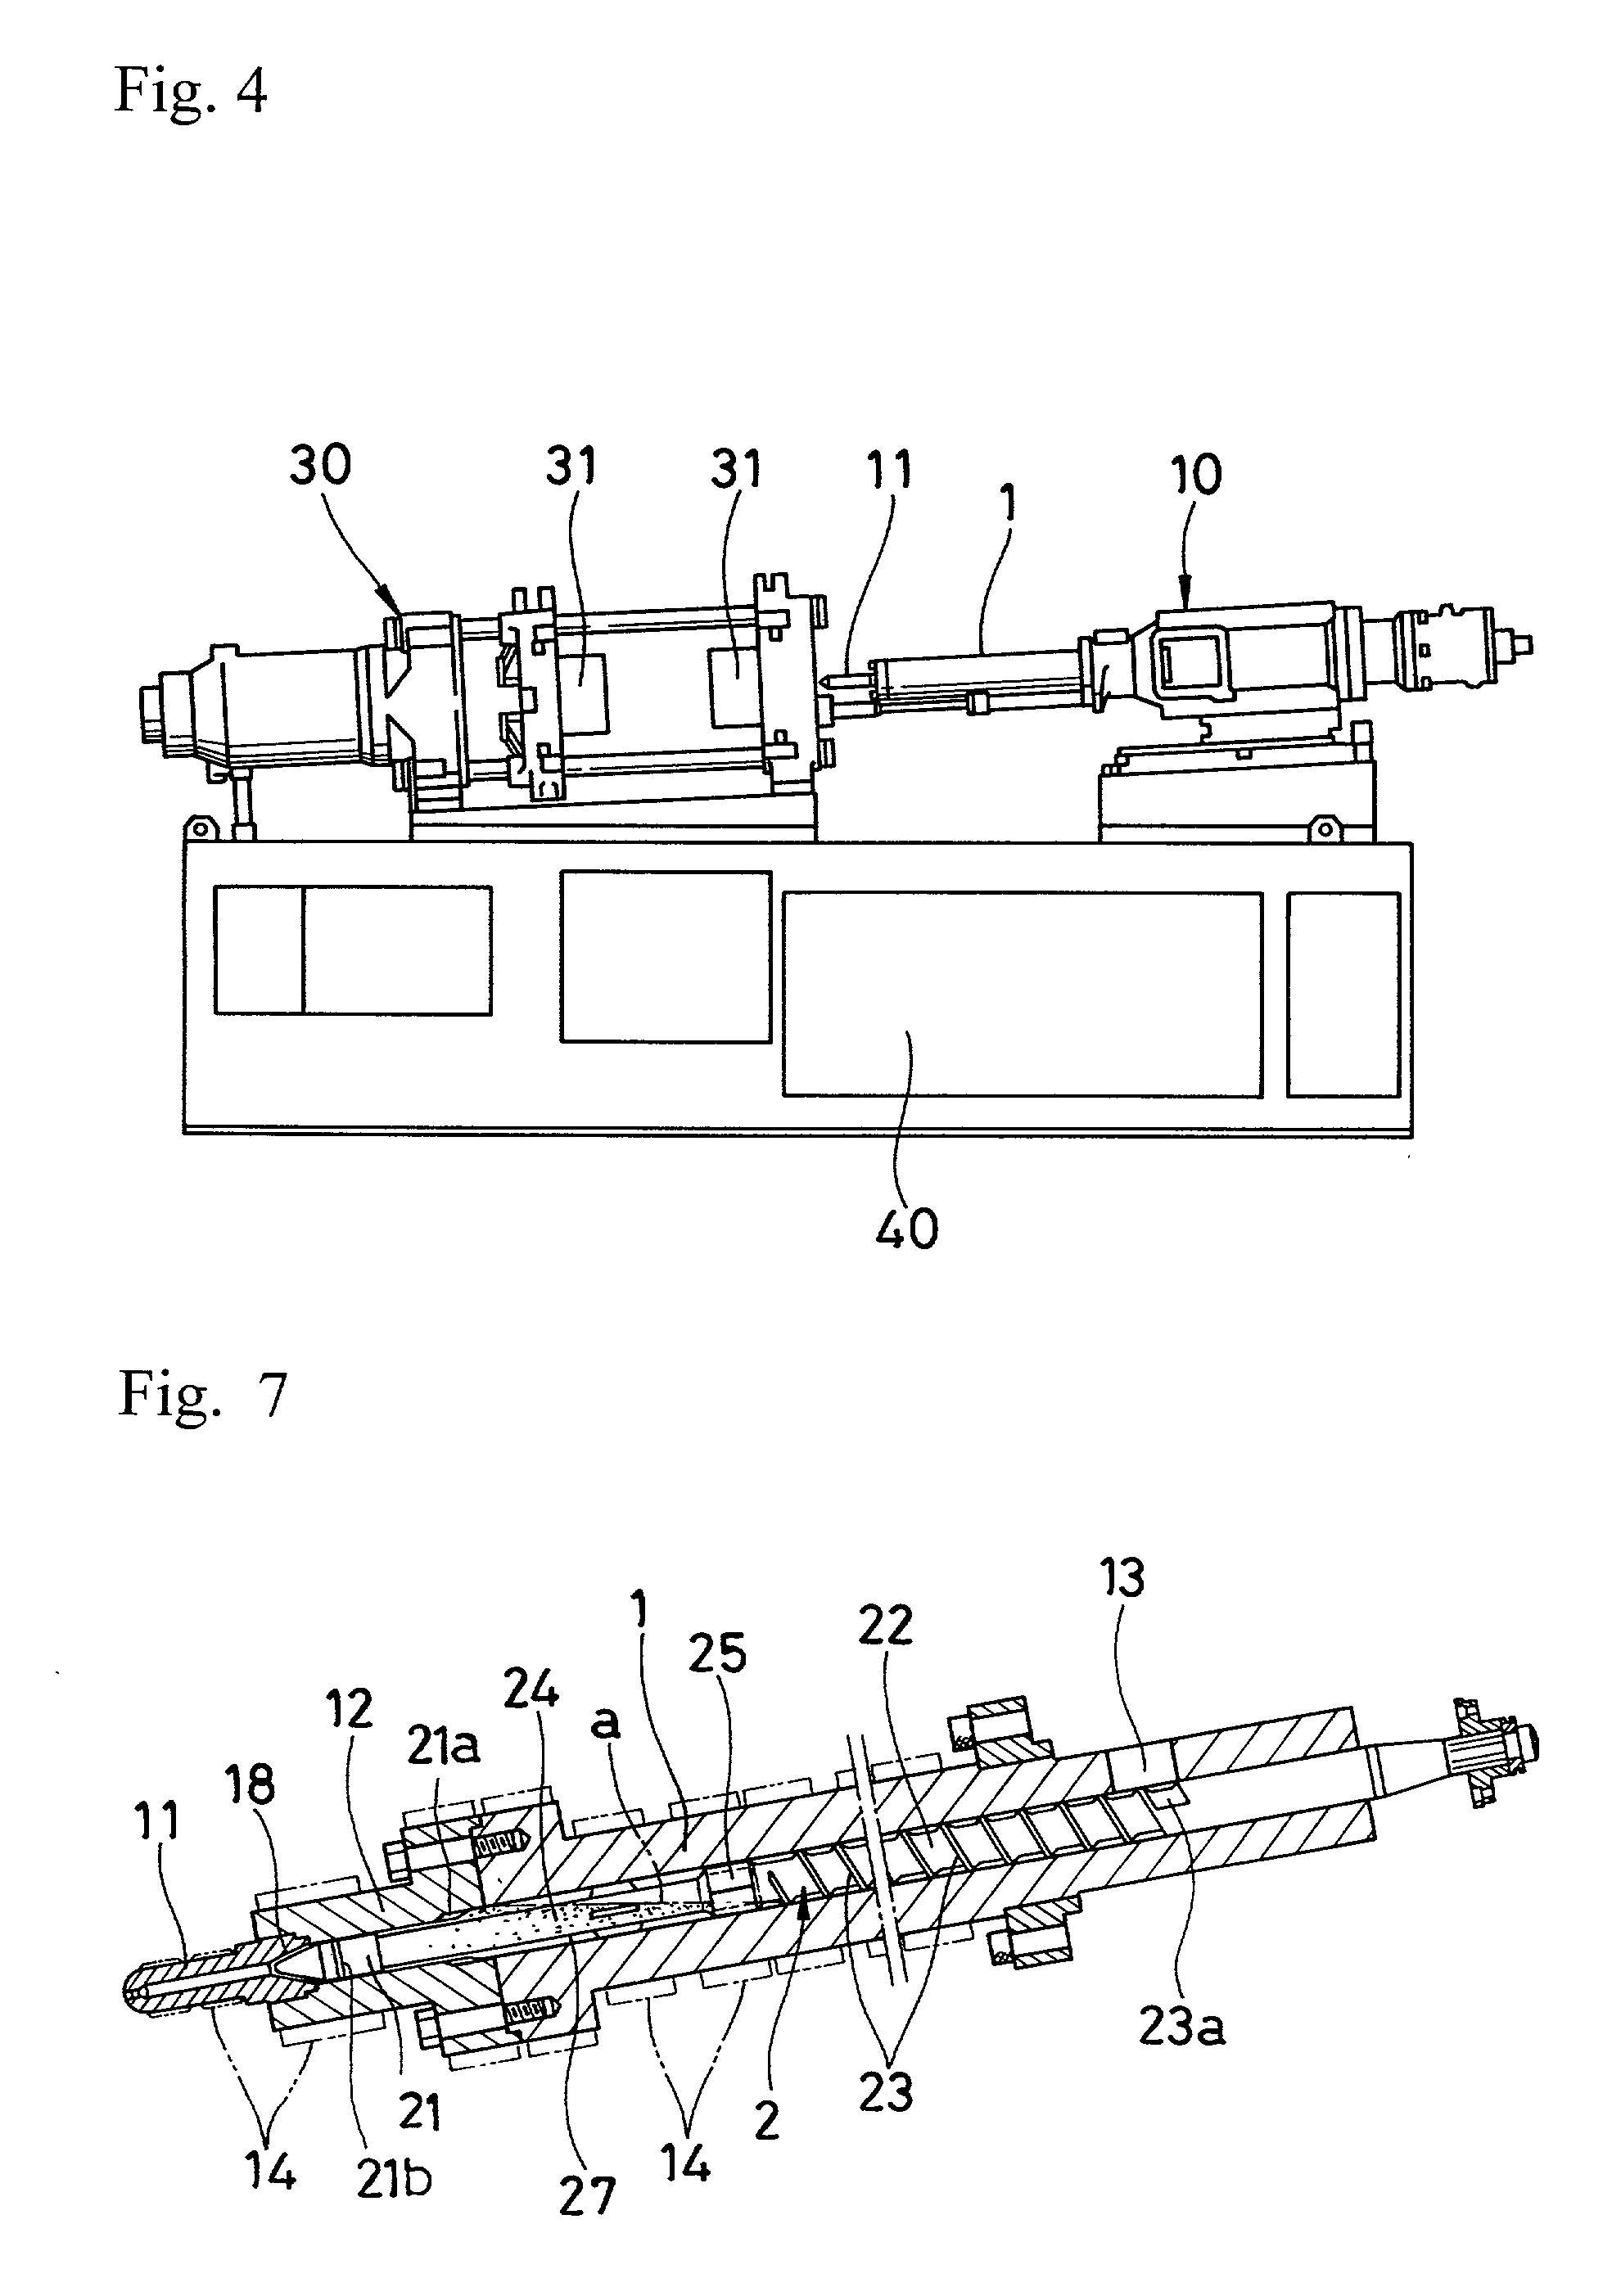 Injection apparatus for melted metals